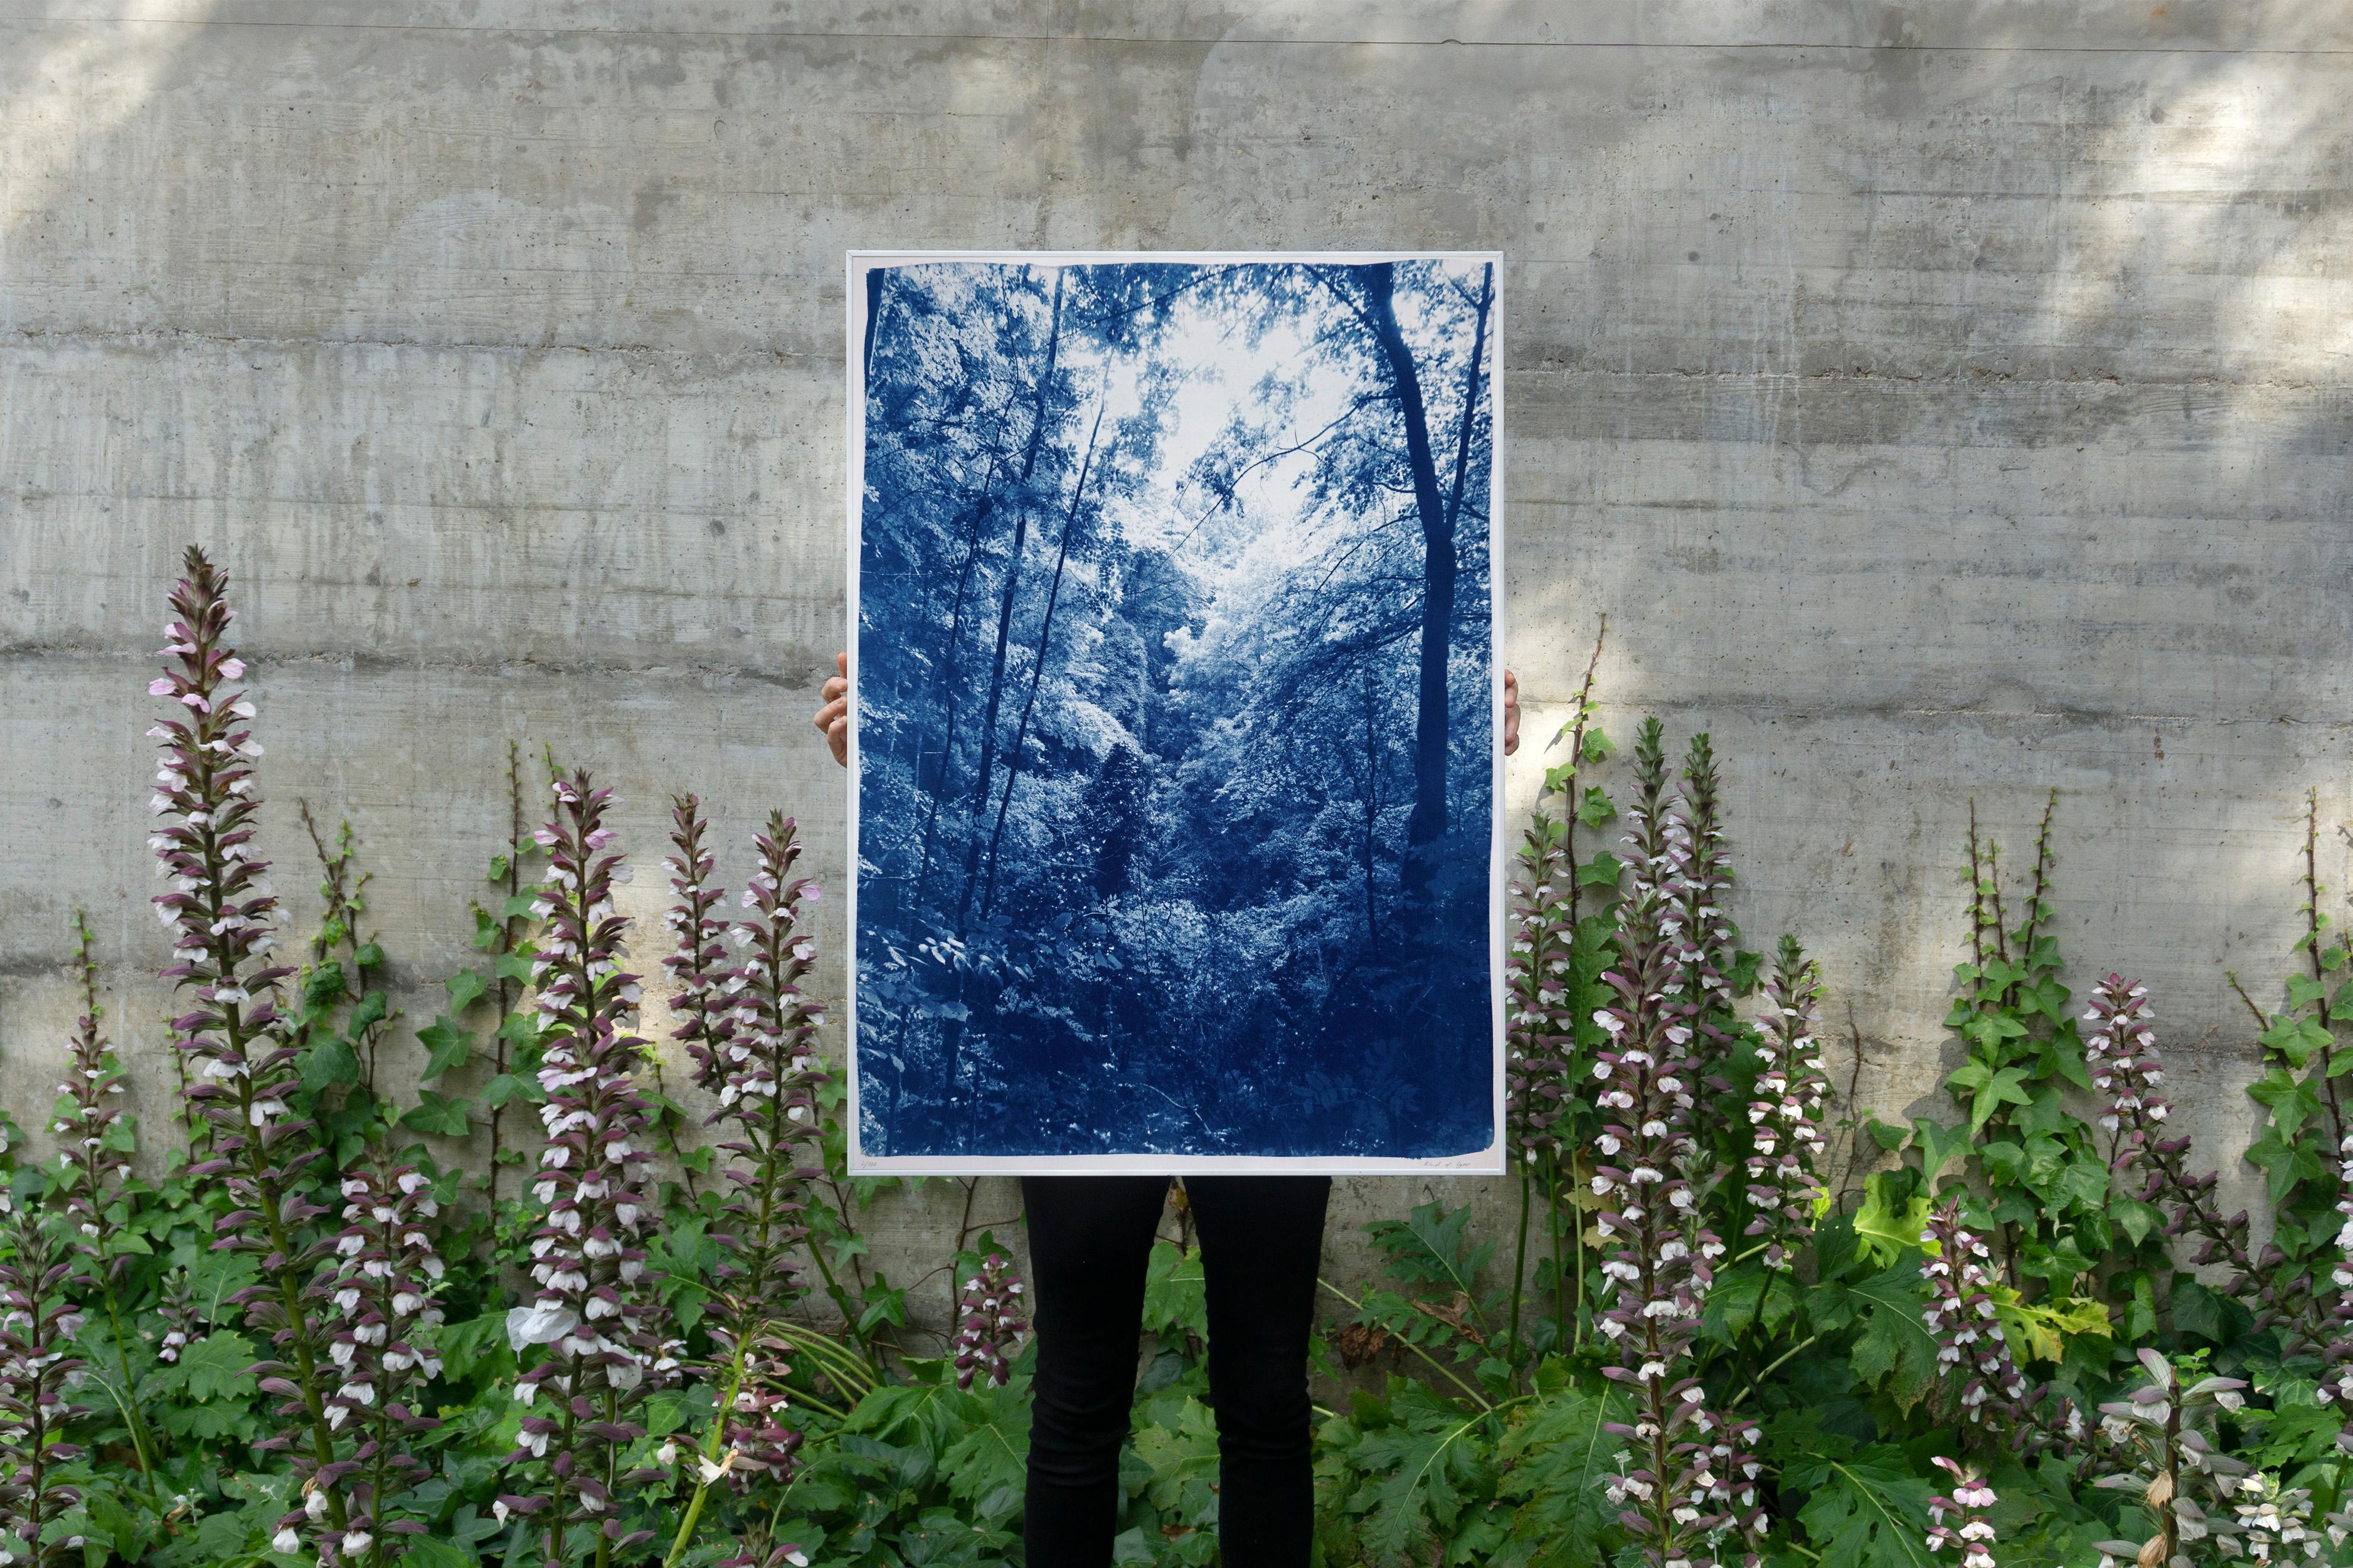 This is an exclusive handprinted limited edition of a cyanotype print.
This beautiful image shows the subtle afternoon light going through the woods during the summer. 

Details:
+ Title: Soft Light in the Woods
+ Year: 2021
+ Edition Size: 100
+